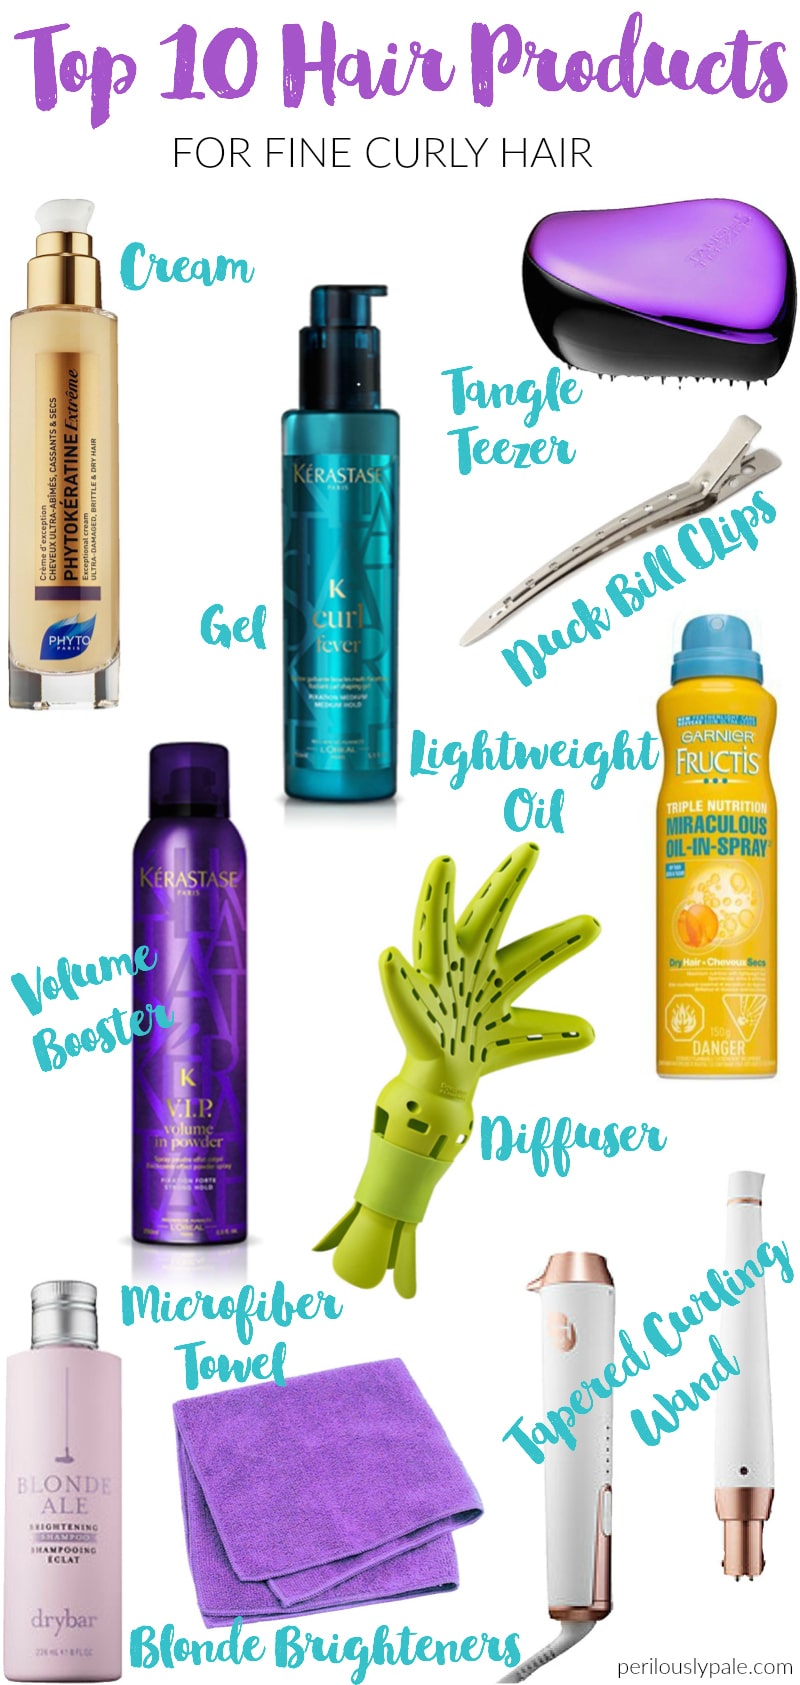 Top 10 Hair Products for Fine, Curly Hair